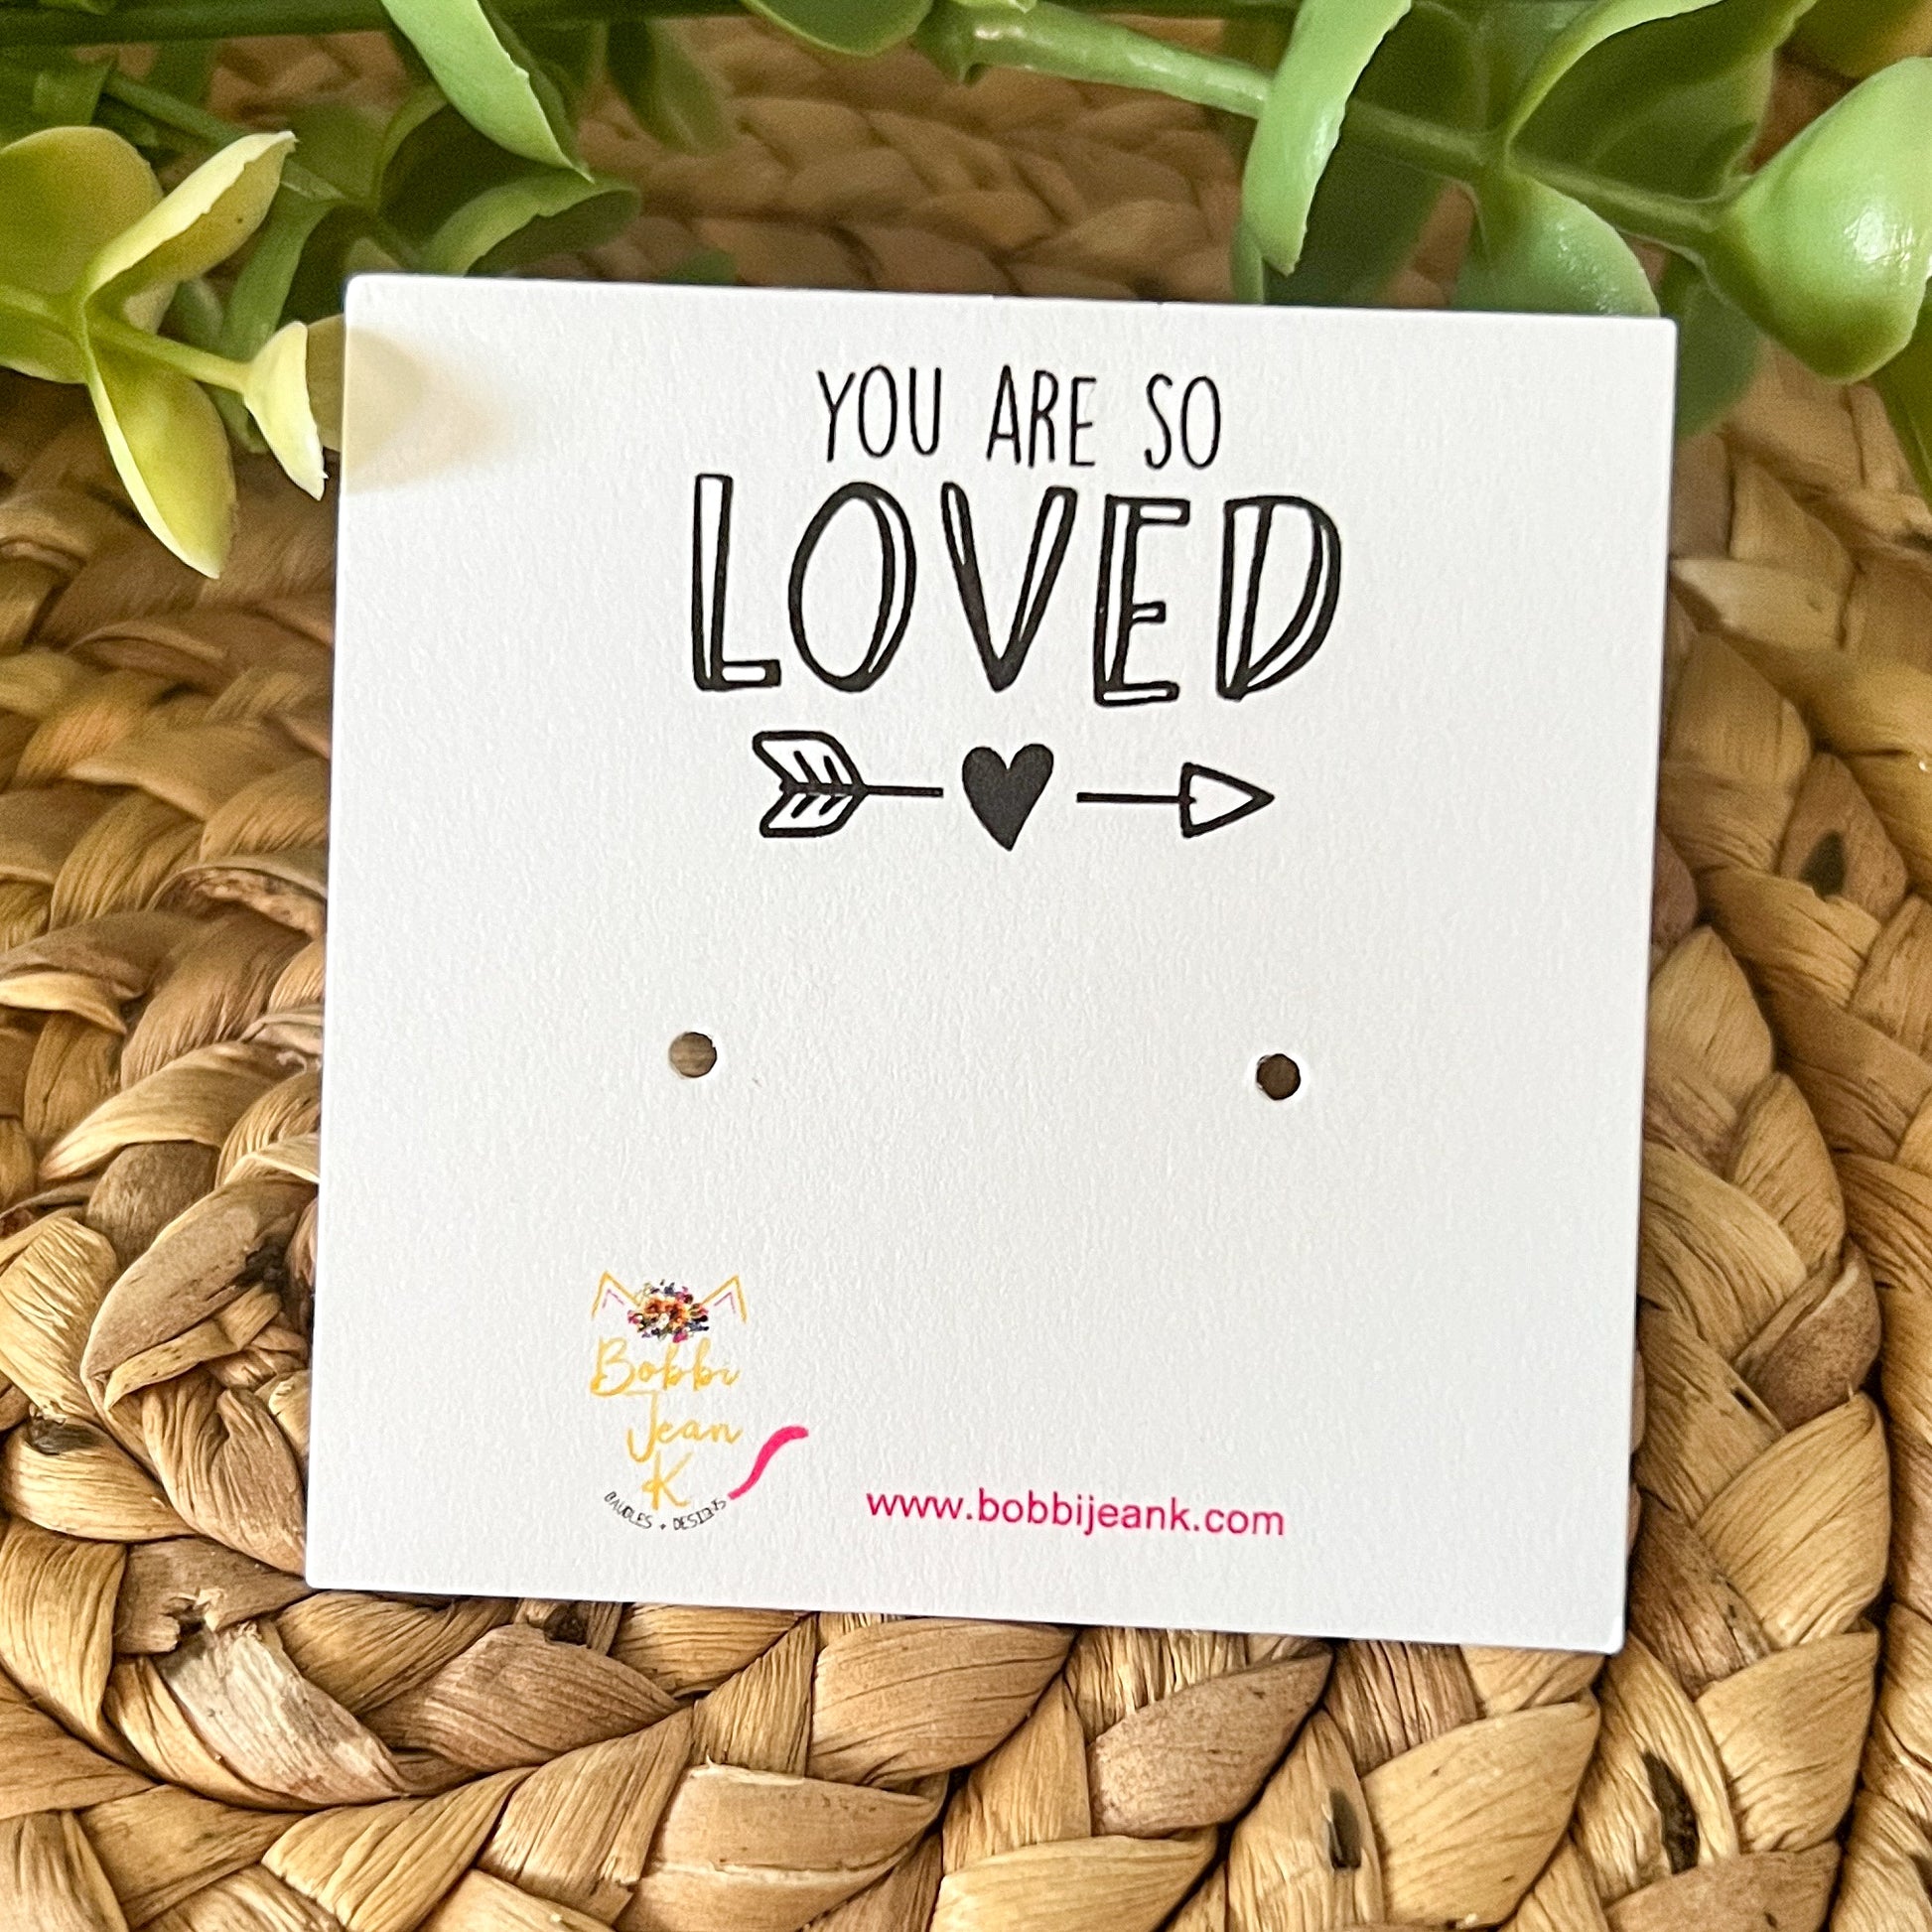 You Are So Loved Earring & Stud Card Add-On for Gift-Giving